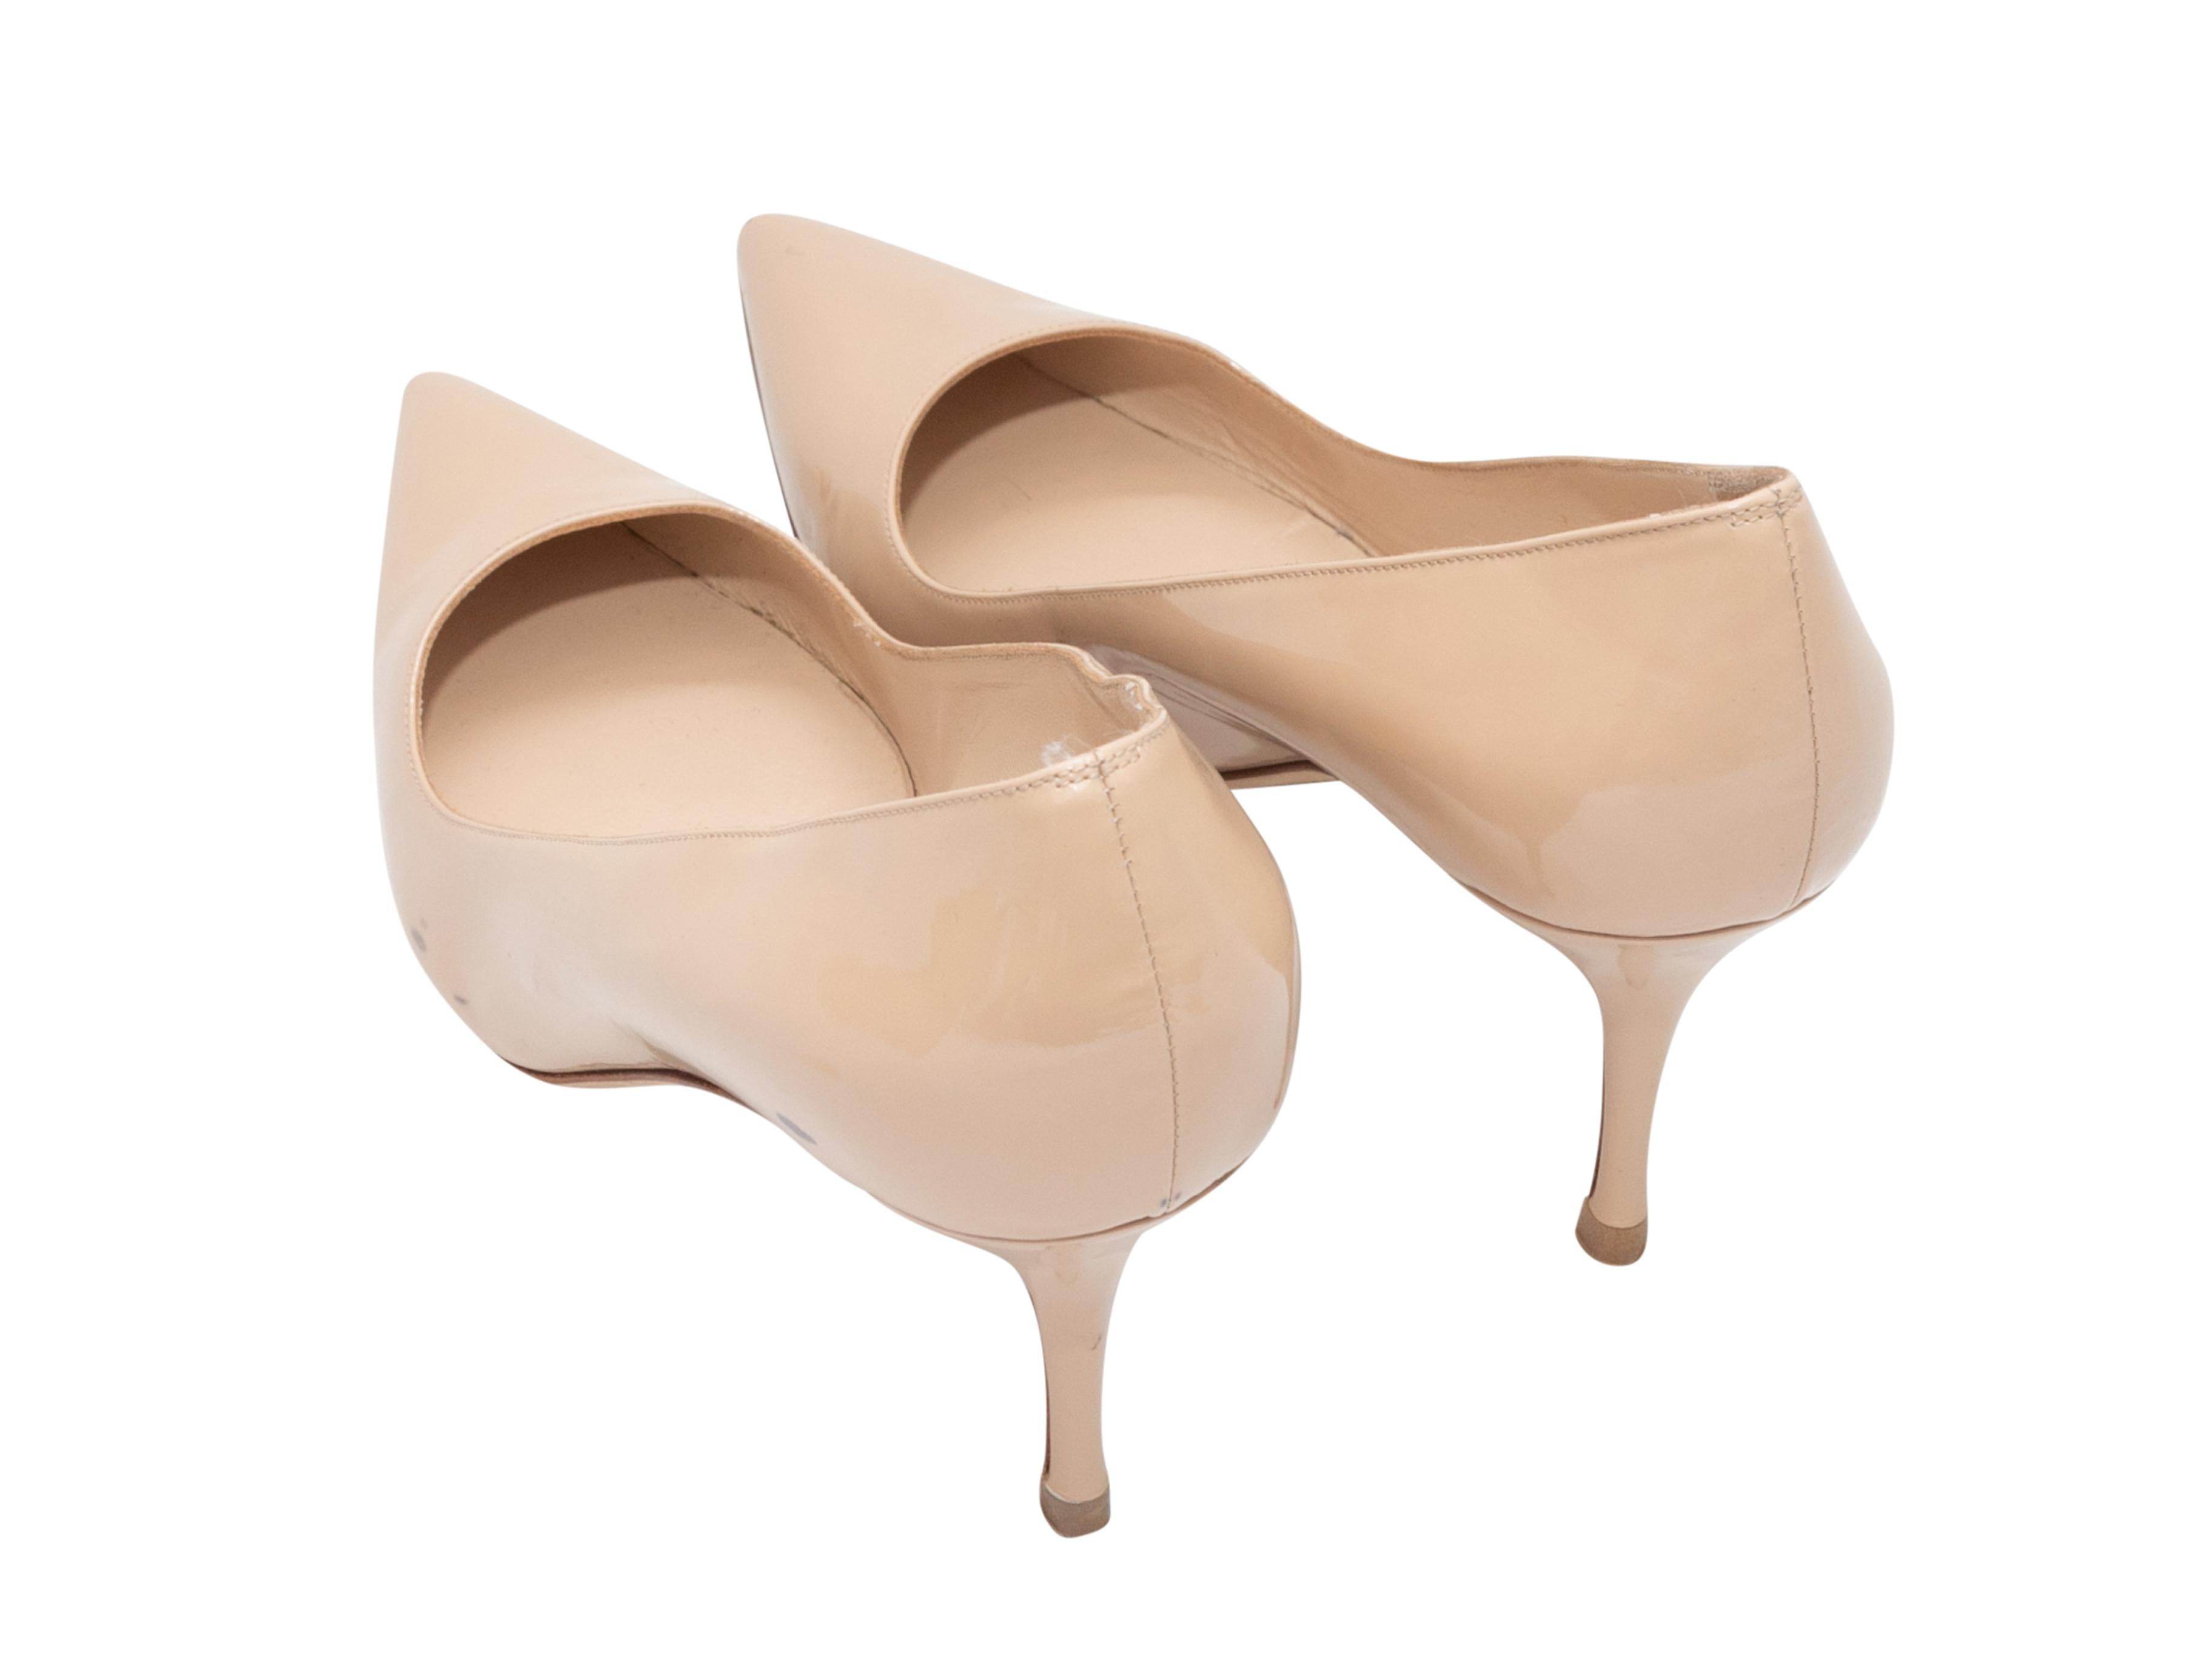 Beige Manolo Blahnik Patent Pointed-Toe Pumps Size 38.5 In Good Condition For Sale In New York, NY